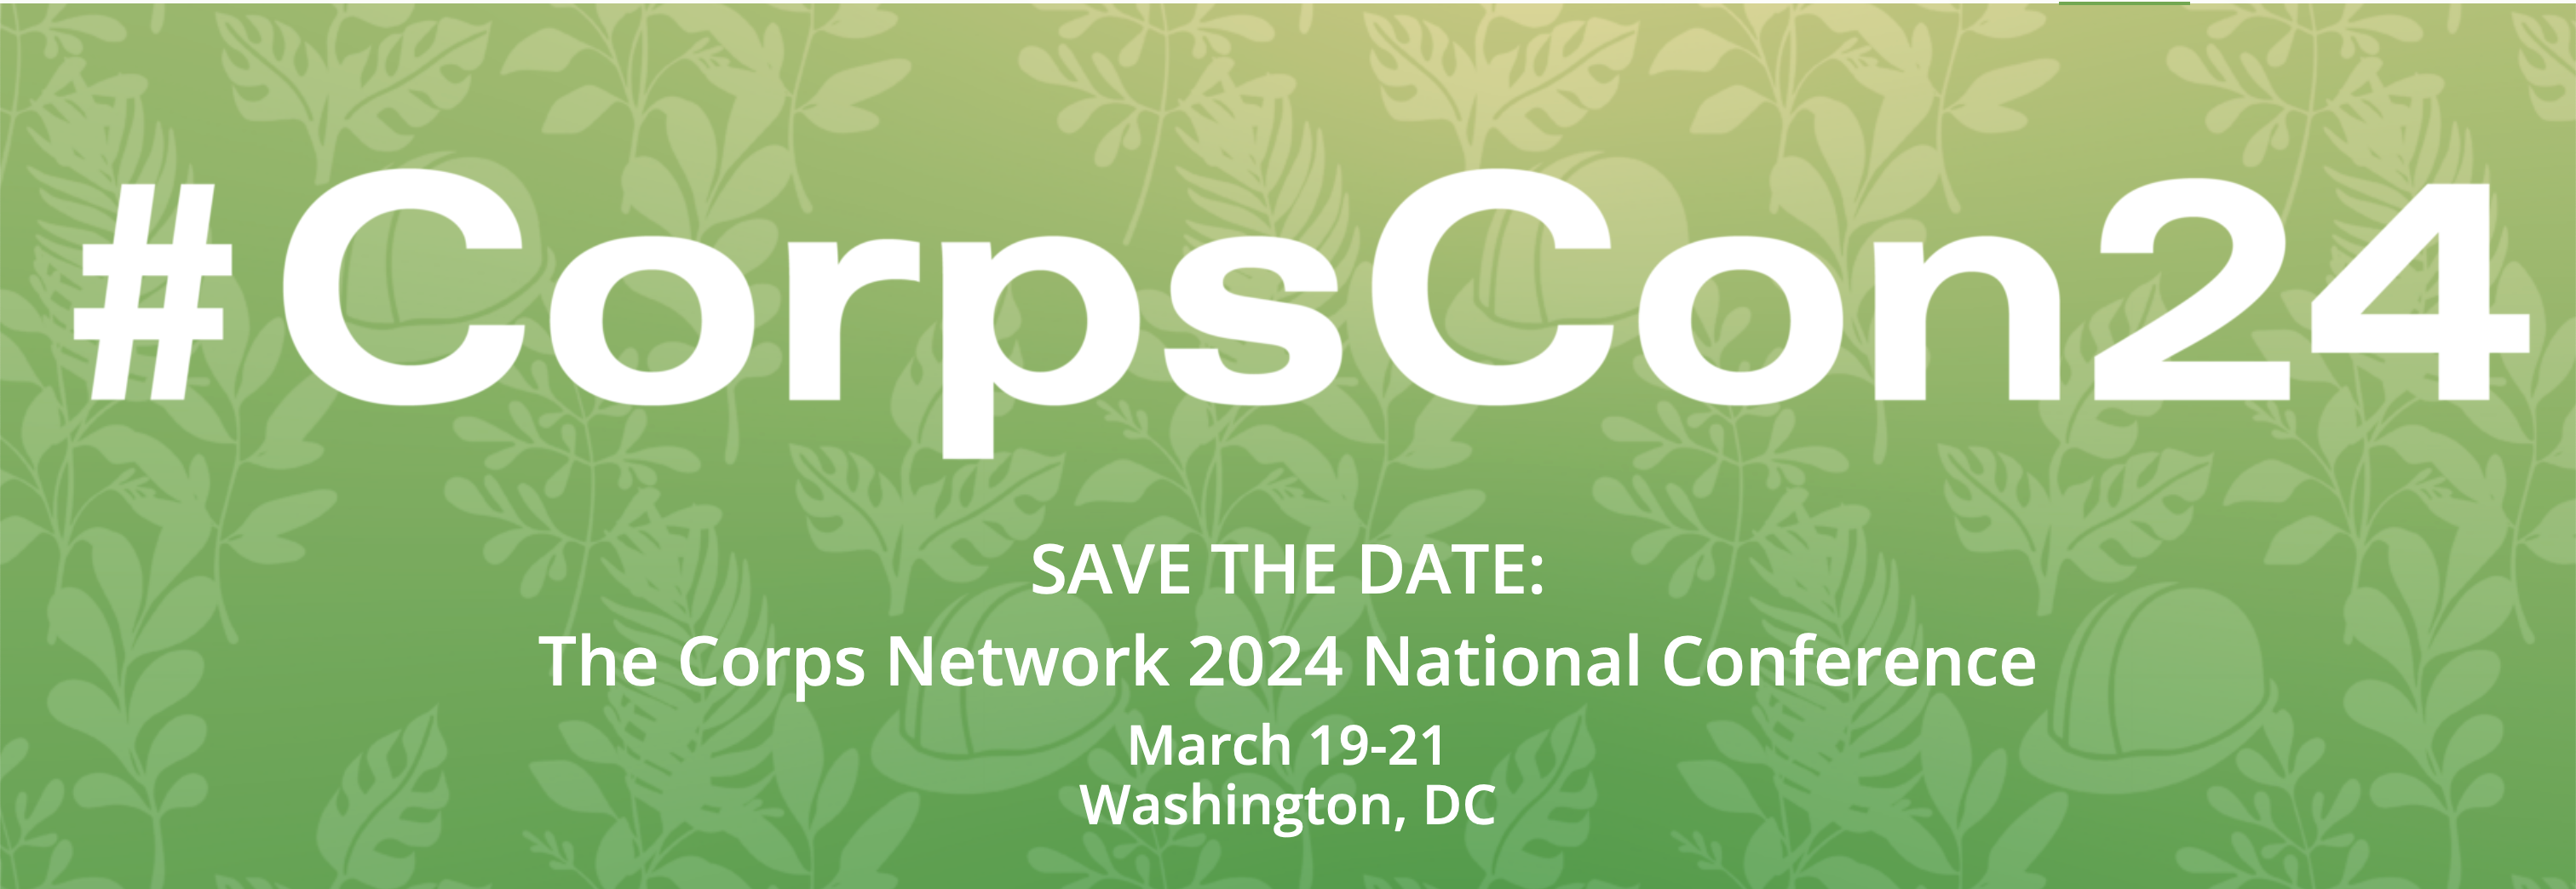 The Corps Network 2024 National Conference